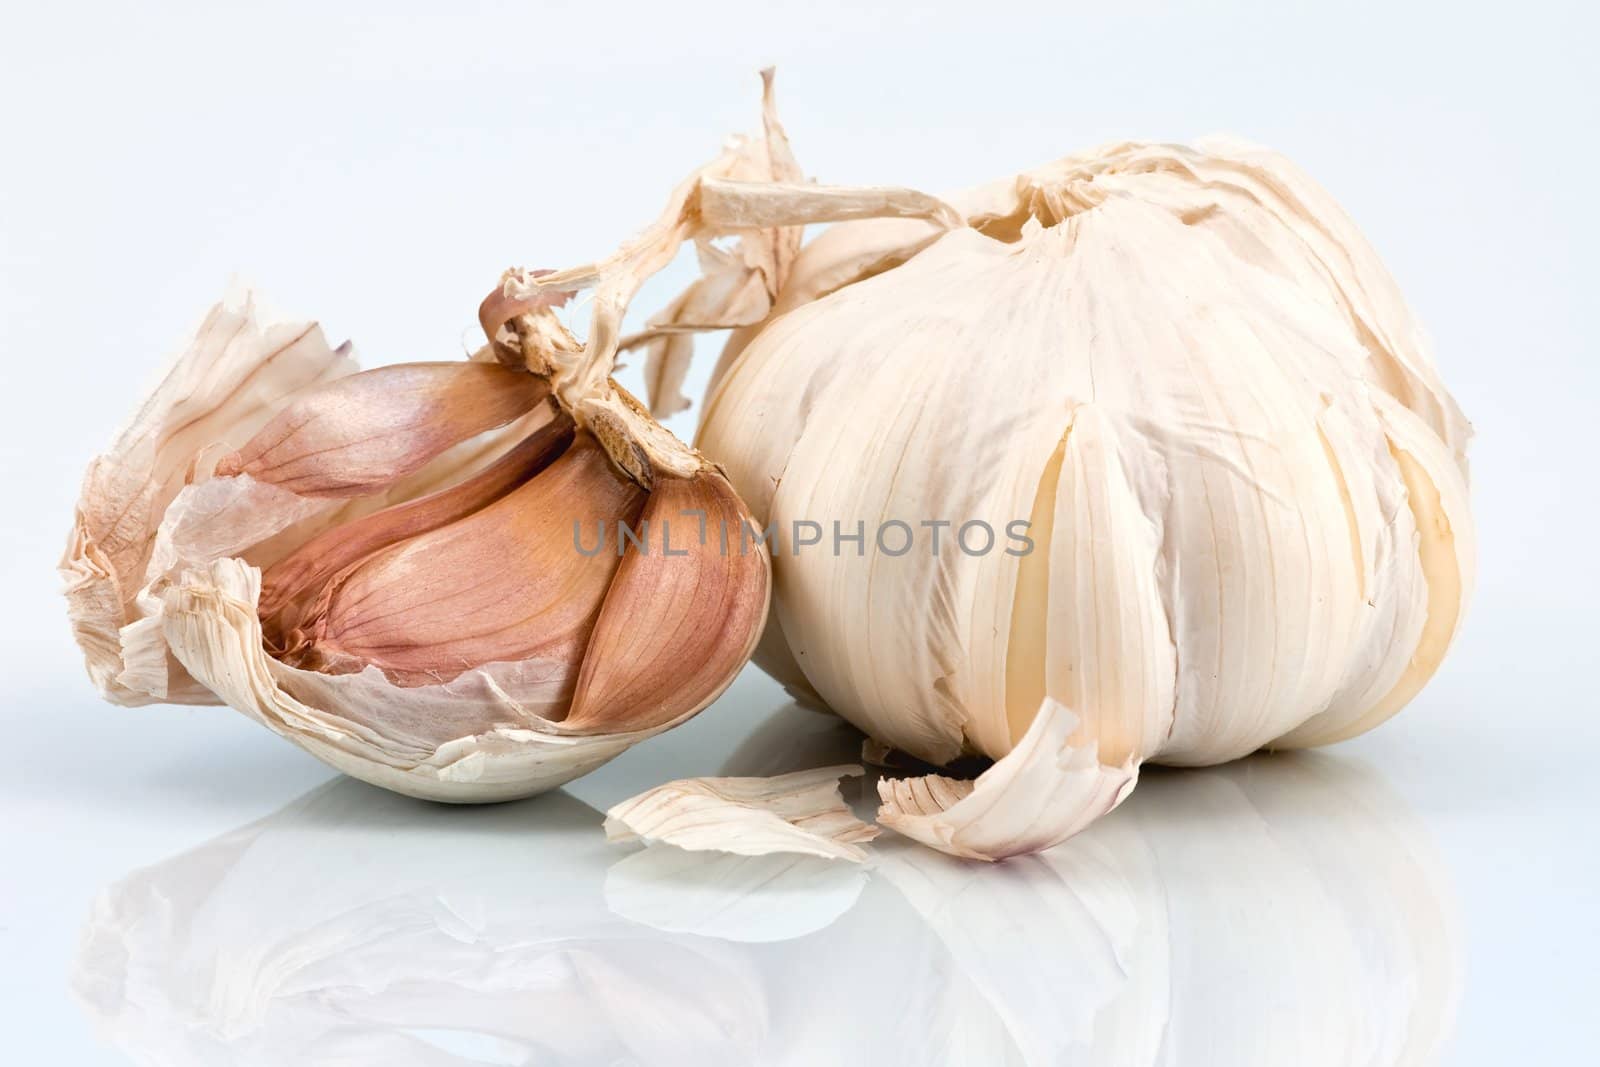 Garlic bulb and cloves on white back with reflection